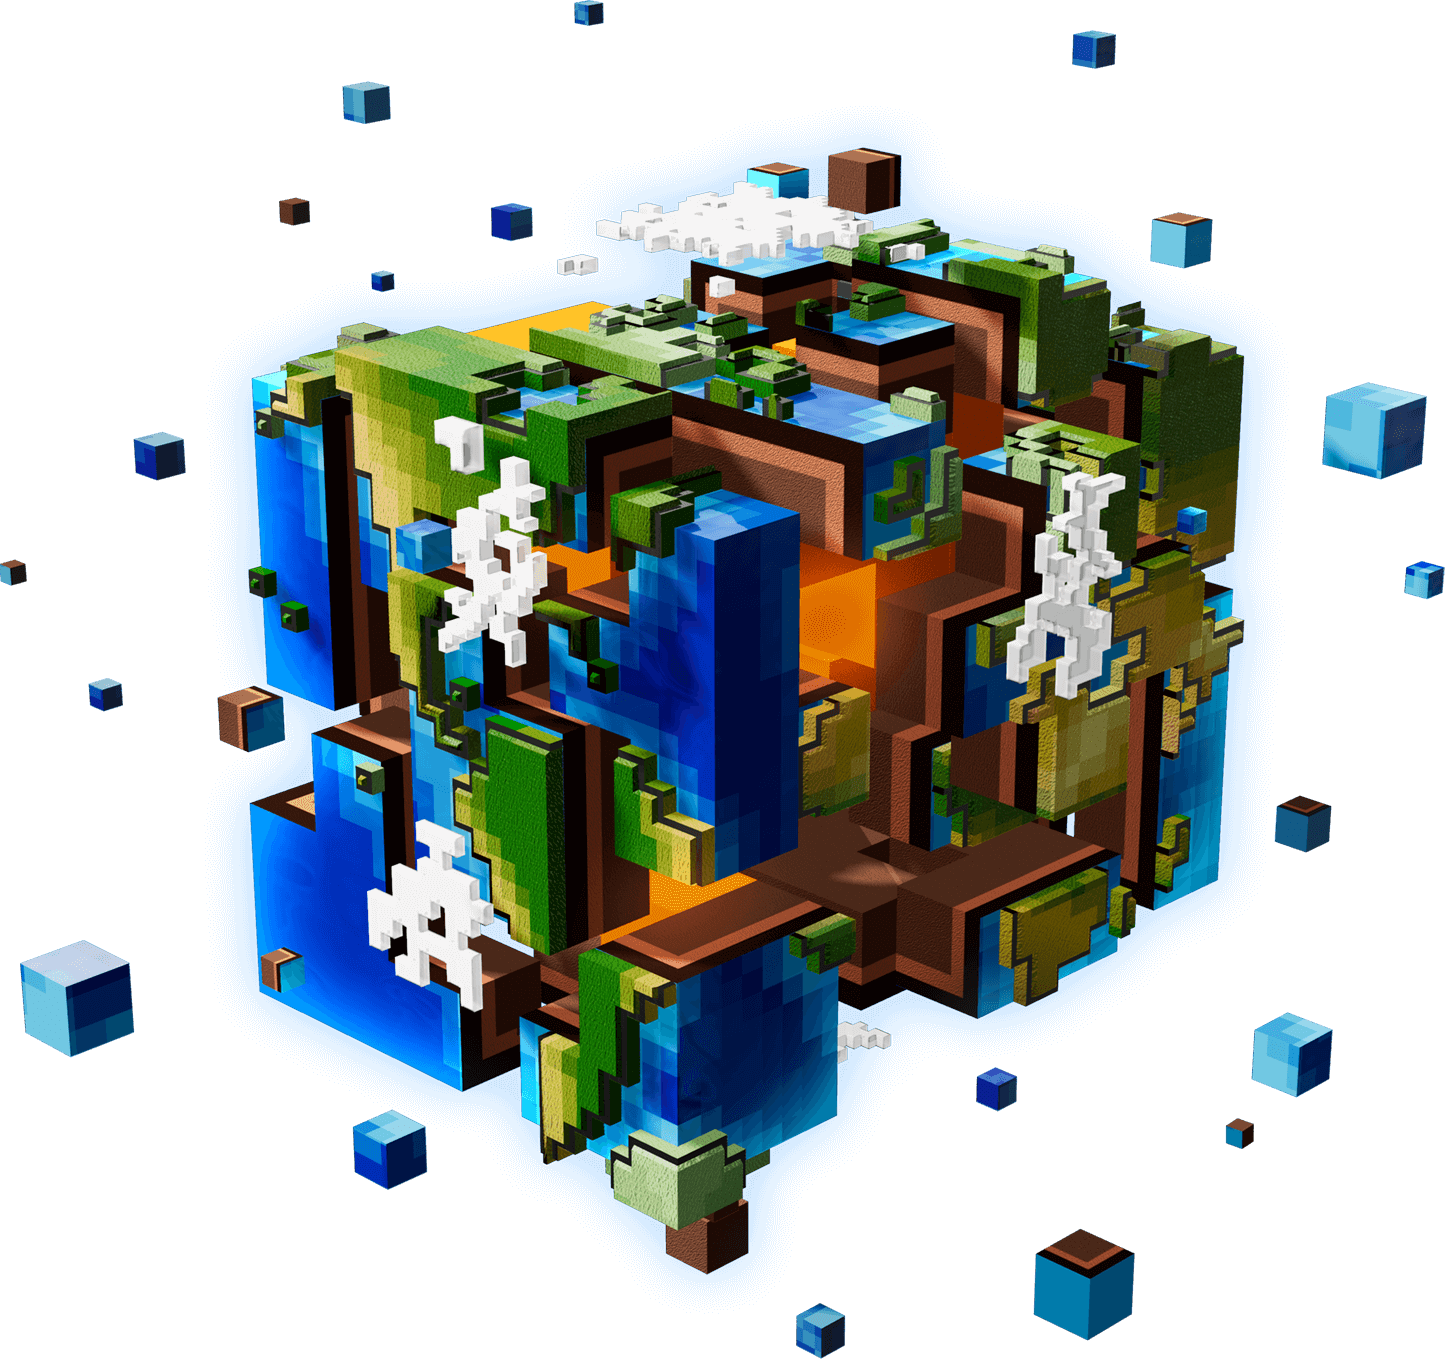 The voxel world of square Earth